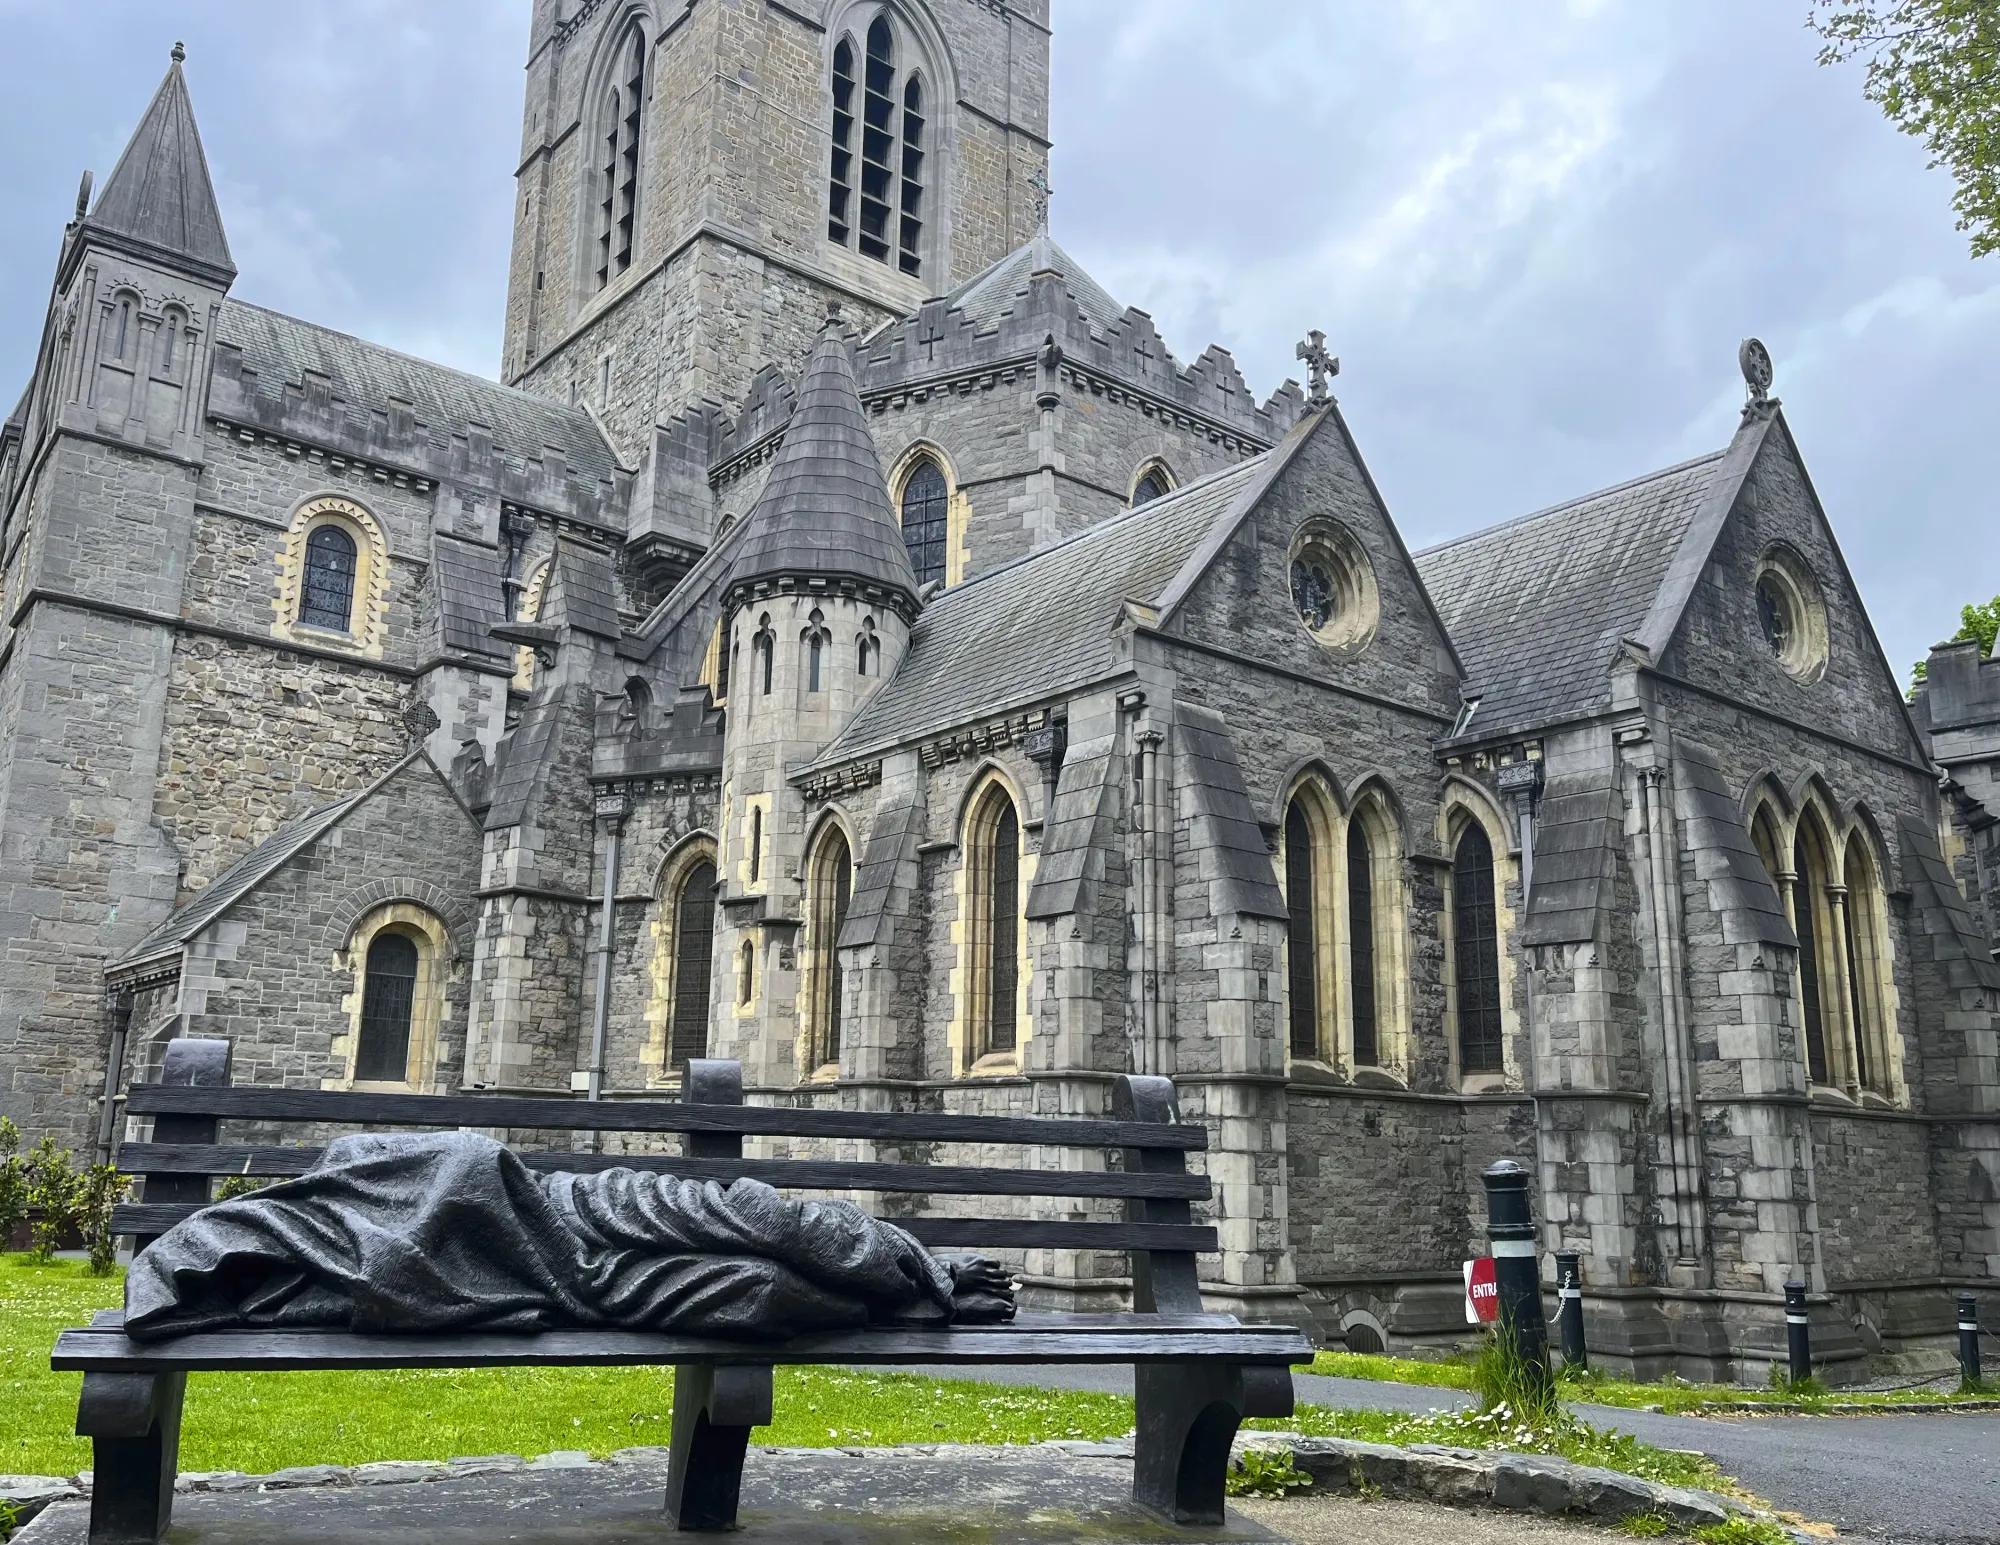 Statue of a wrapped figure laying on a bench in front of a grey stone cathedral